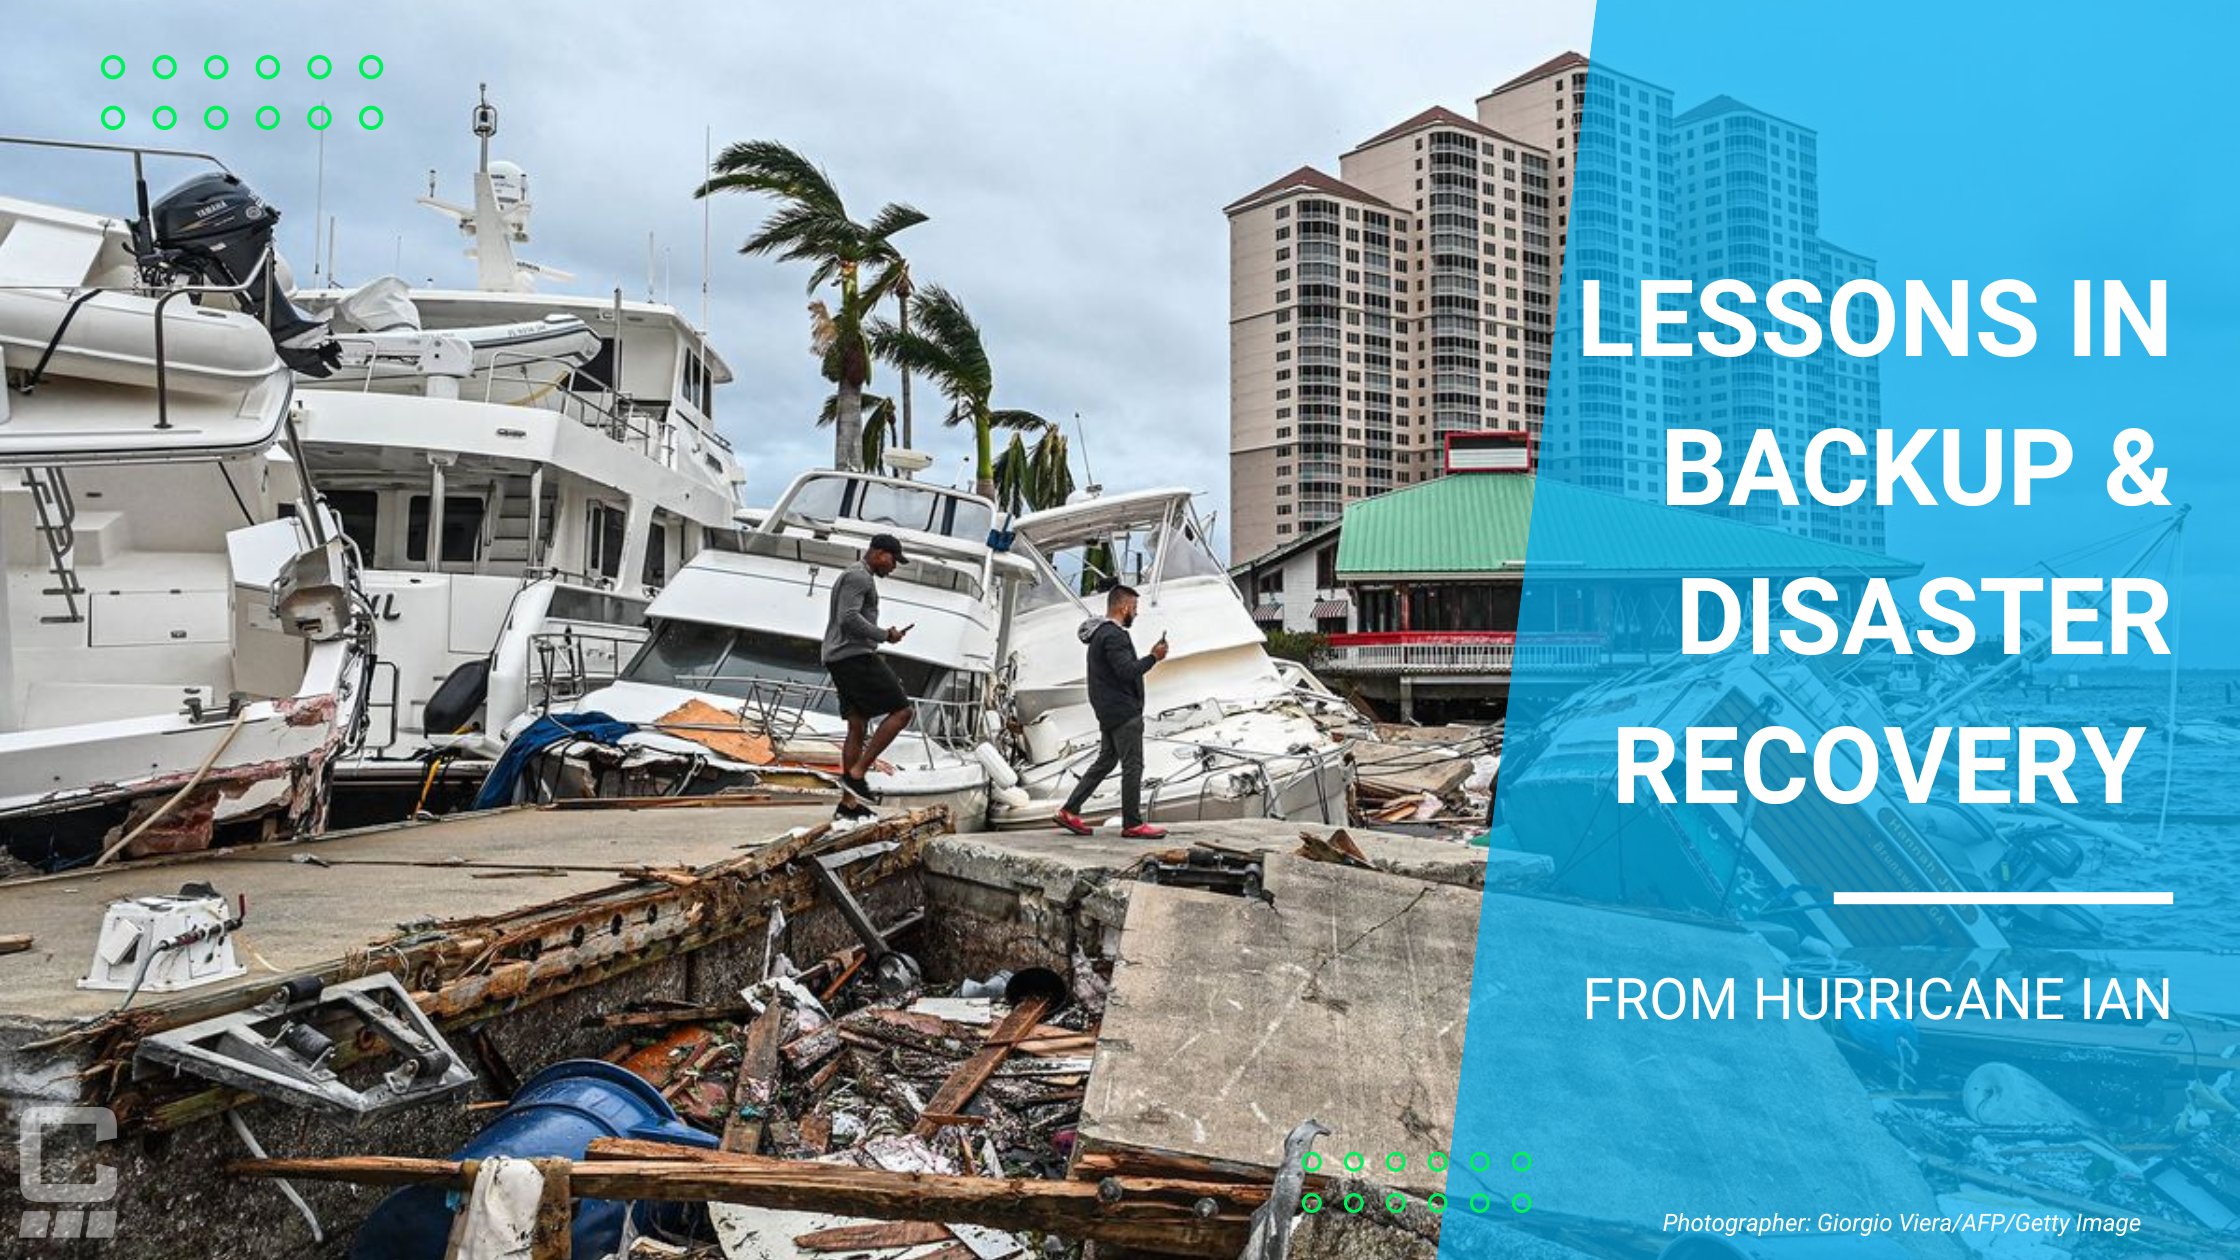 What Hurricane Ian Taught us About Backup & Disaster Recovery